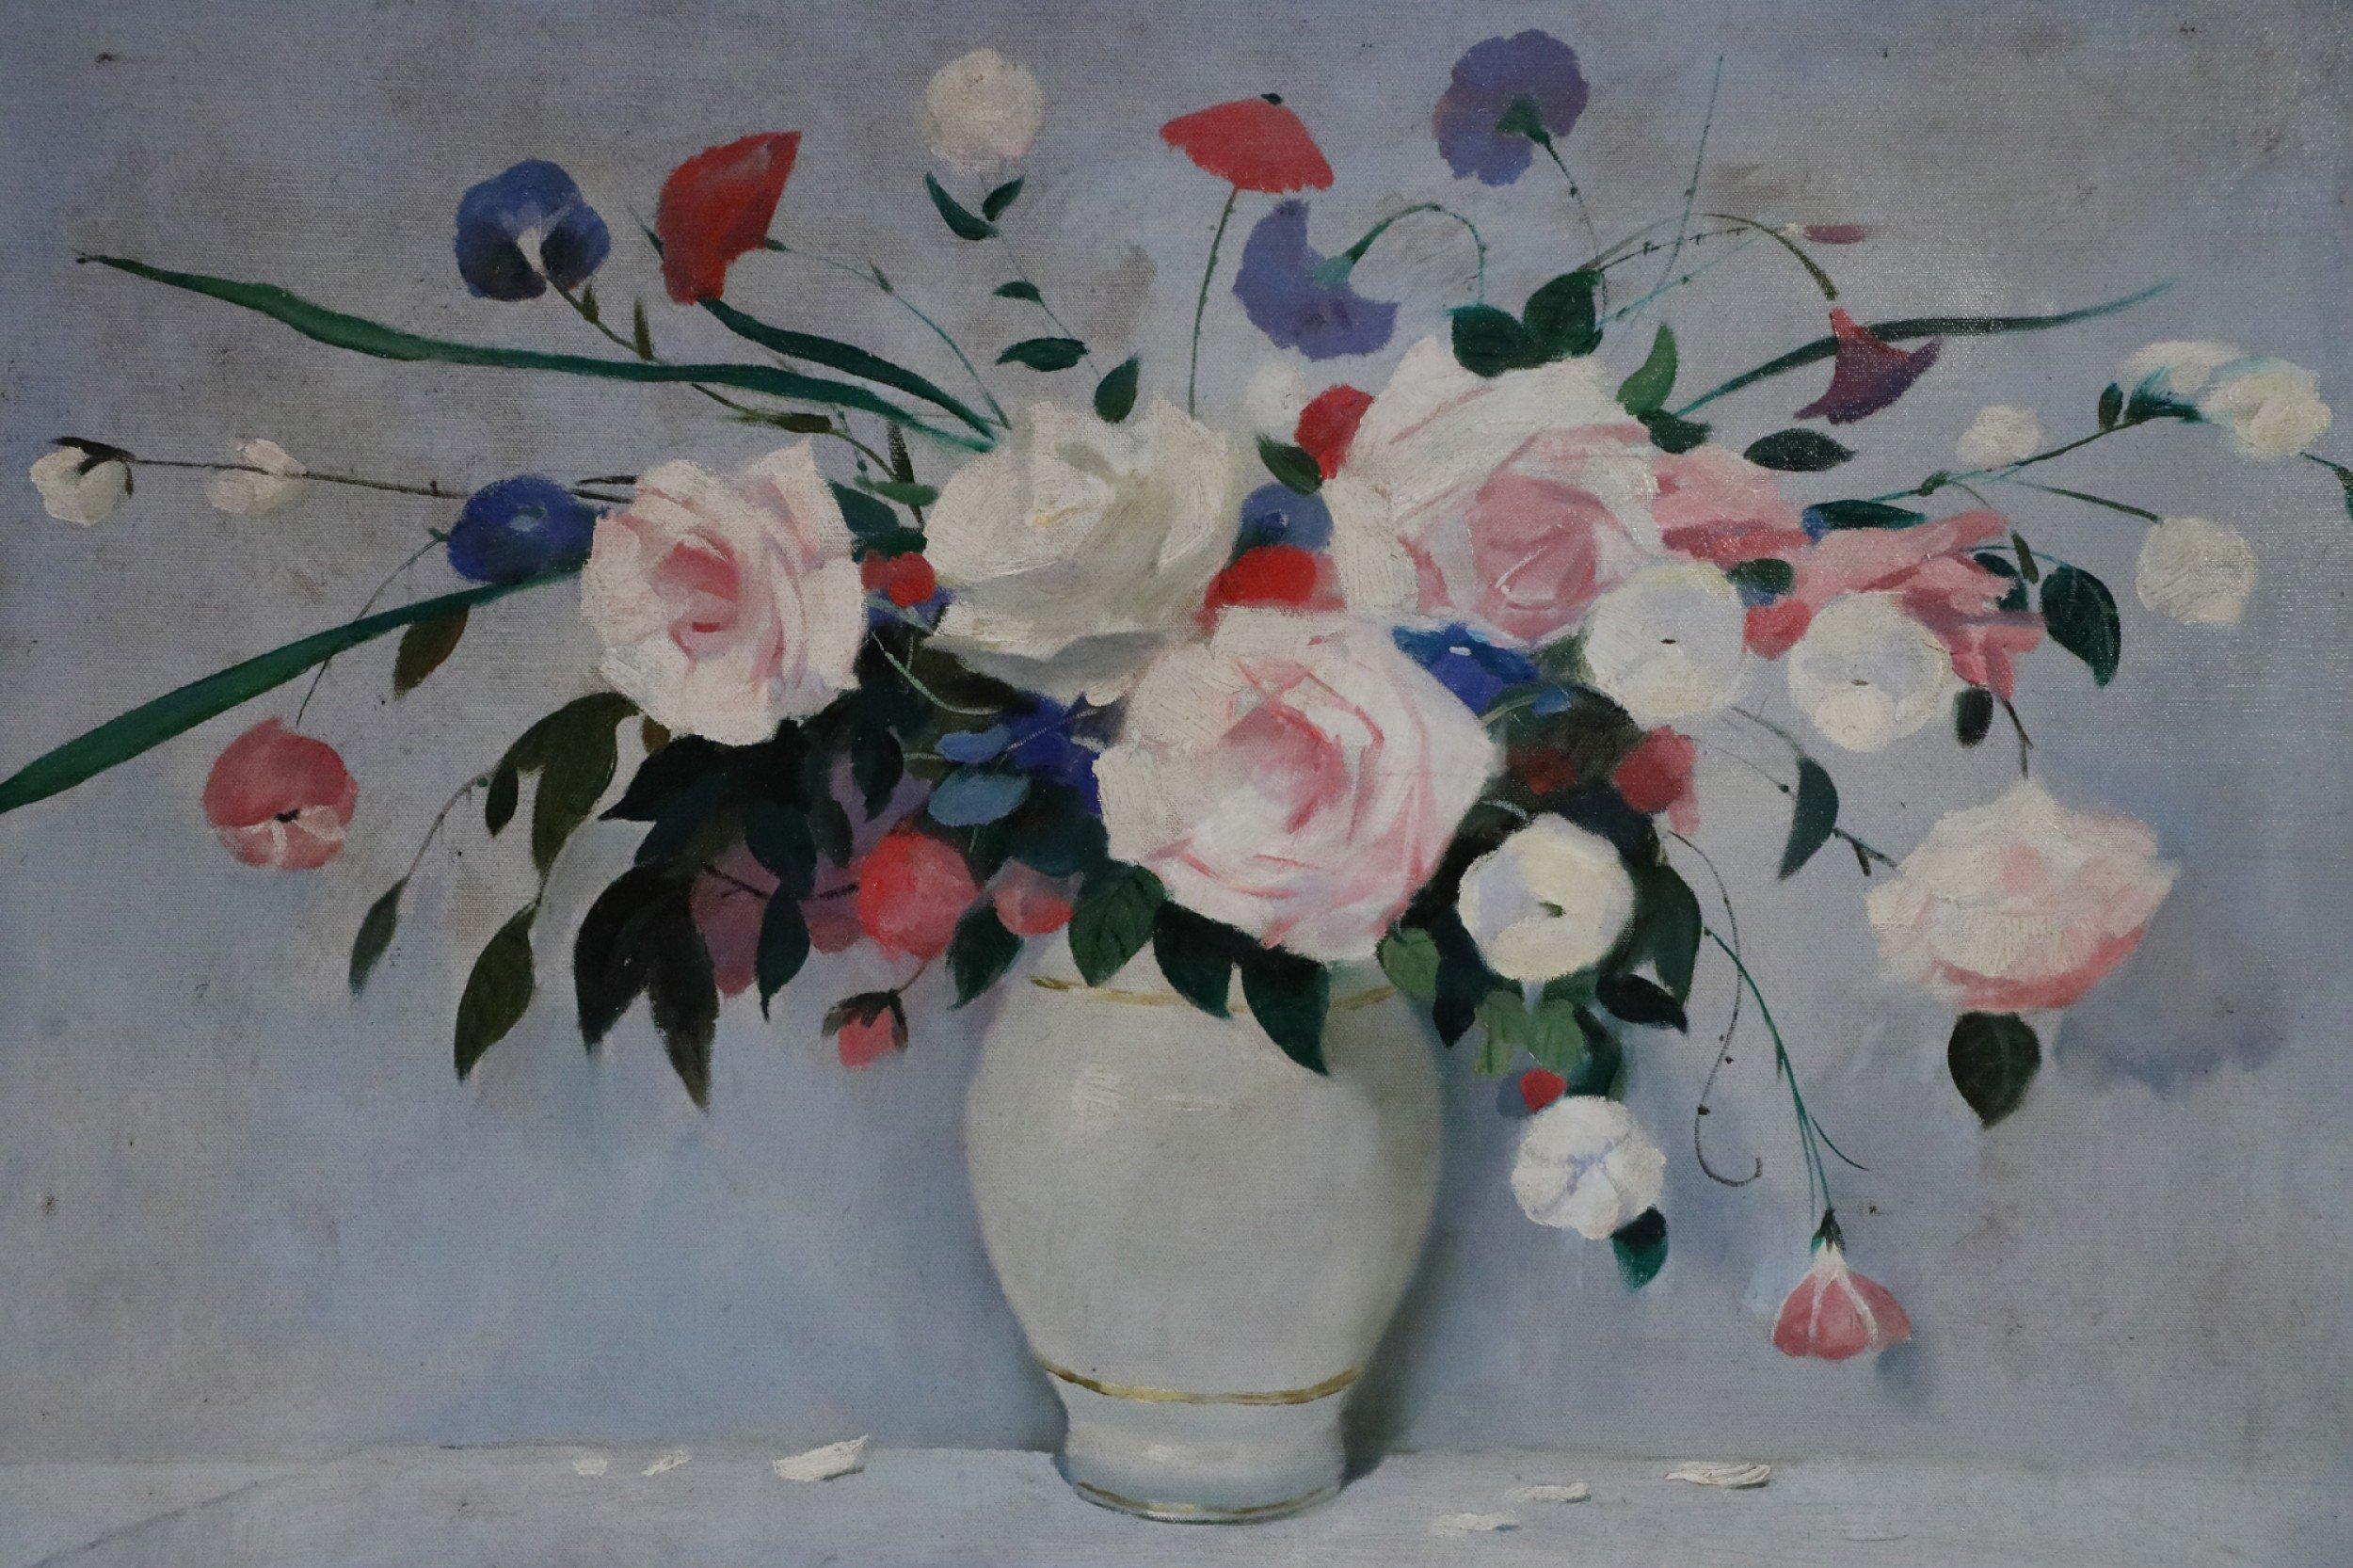 Vintage (20th Century) unframed canvas oil painting of a white and gold vase holding an abundant arrangement of white, pink, purple and red florals, against a pale blue background, foreground and shelf dotted with fallen petals.
  